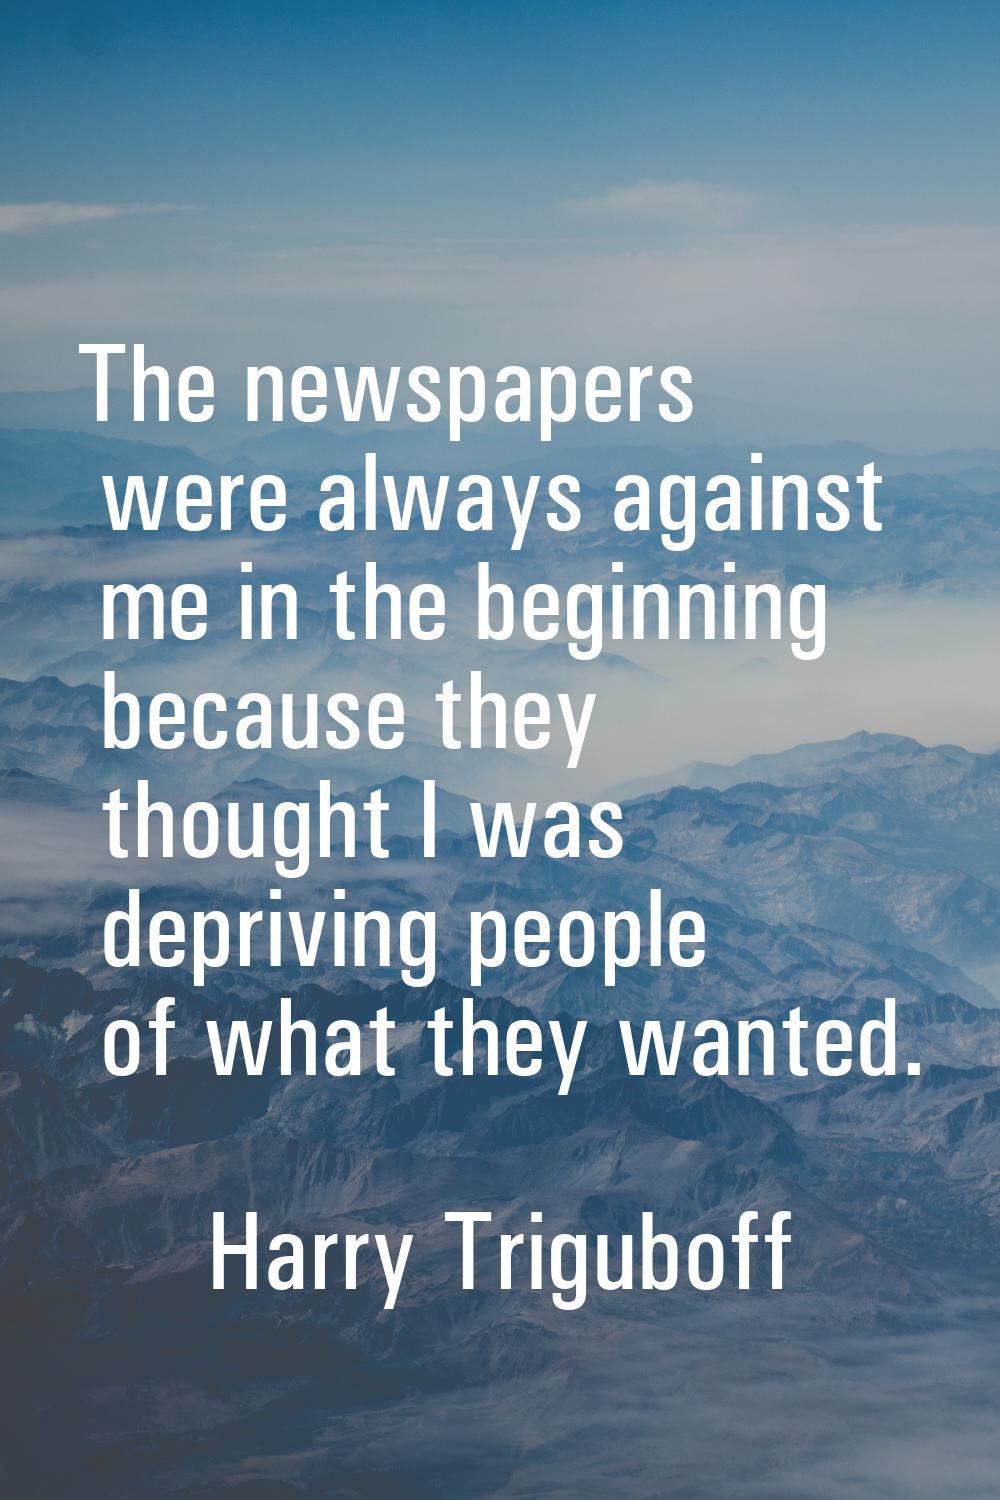 The newspapers were always against me in the beginning because they thought I was depriving people 